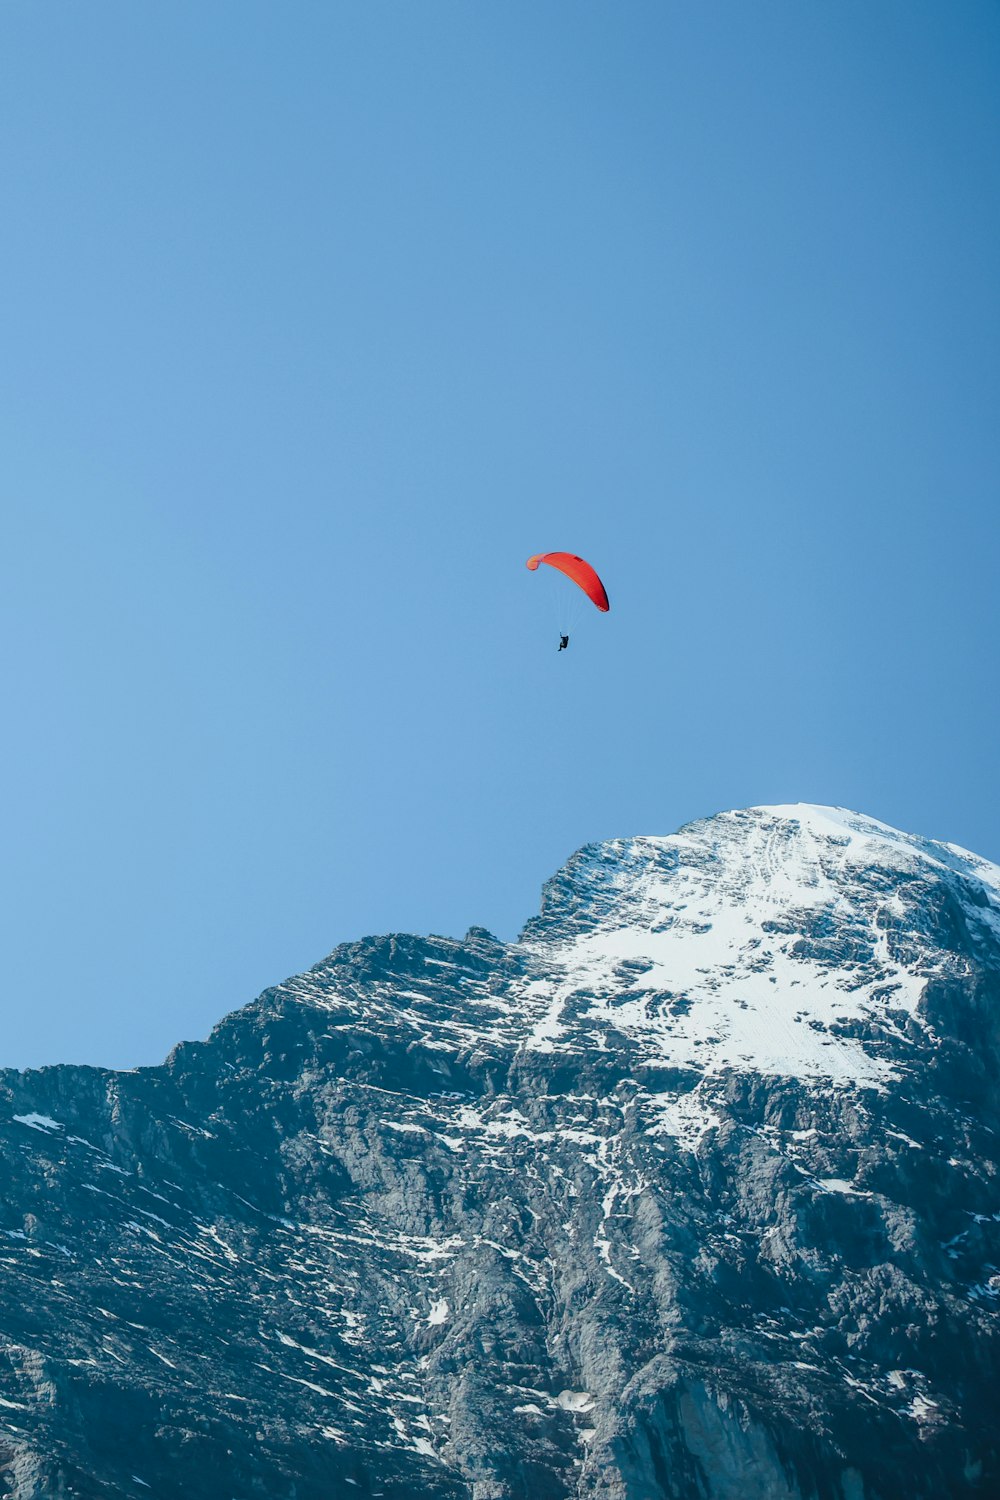 a person in the air with a parachute above a snowy mountain